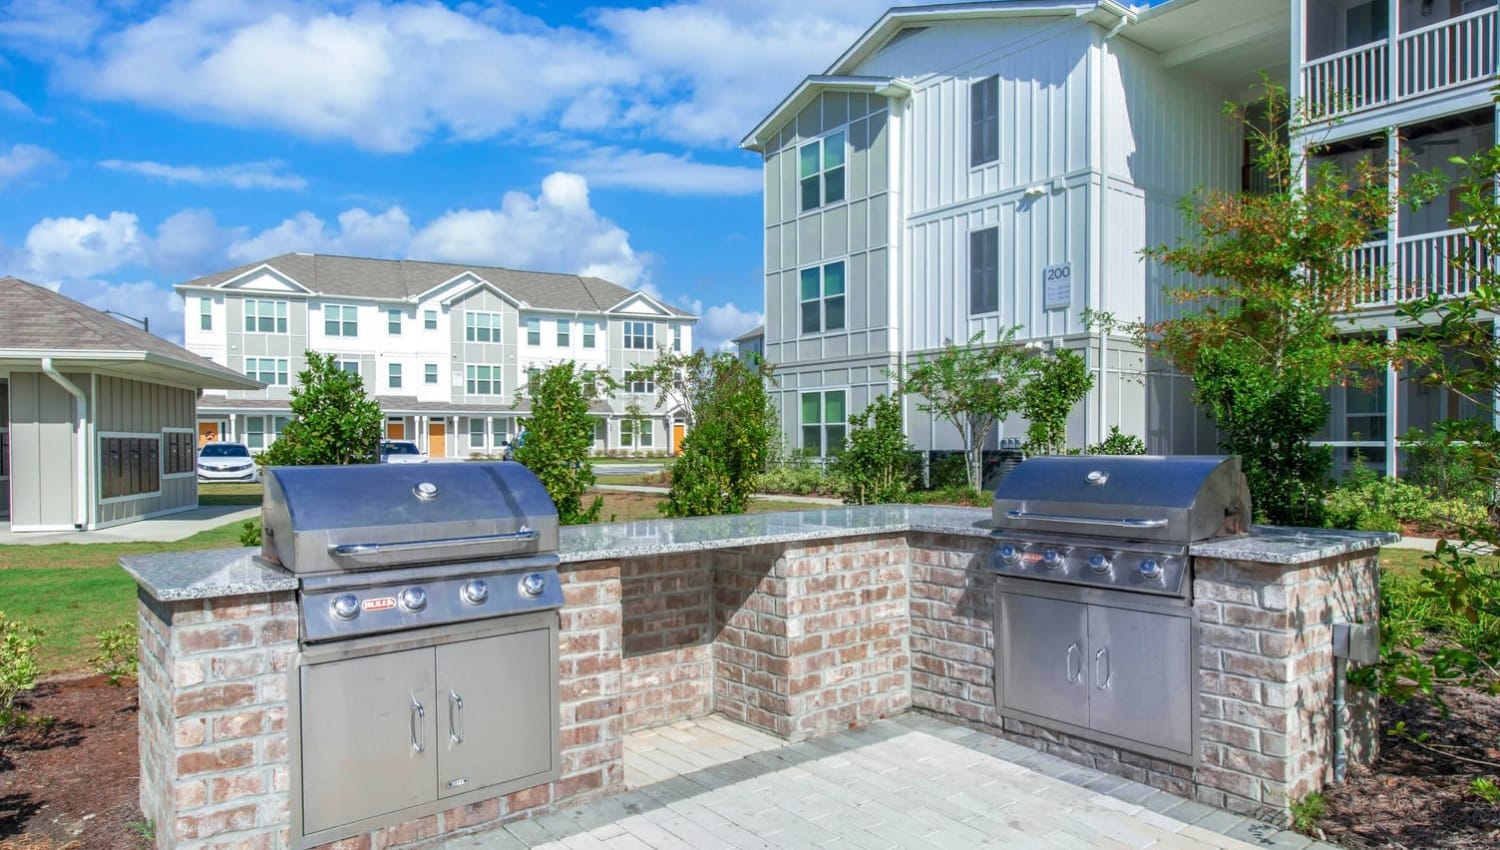 Grills outside at Capital Crest at Godley Station in Savannah, Georgia